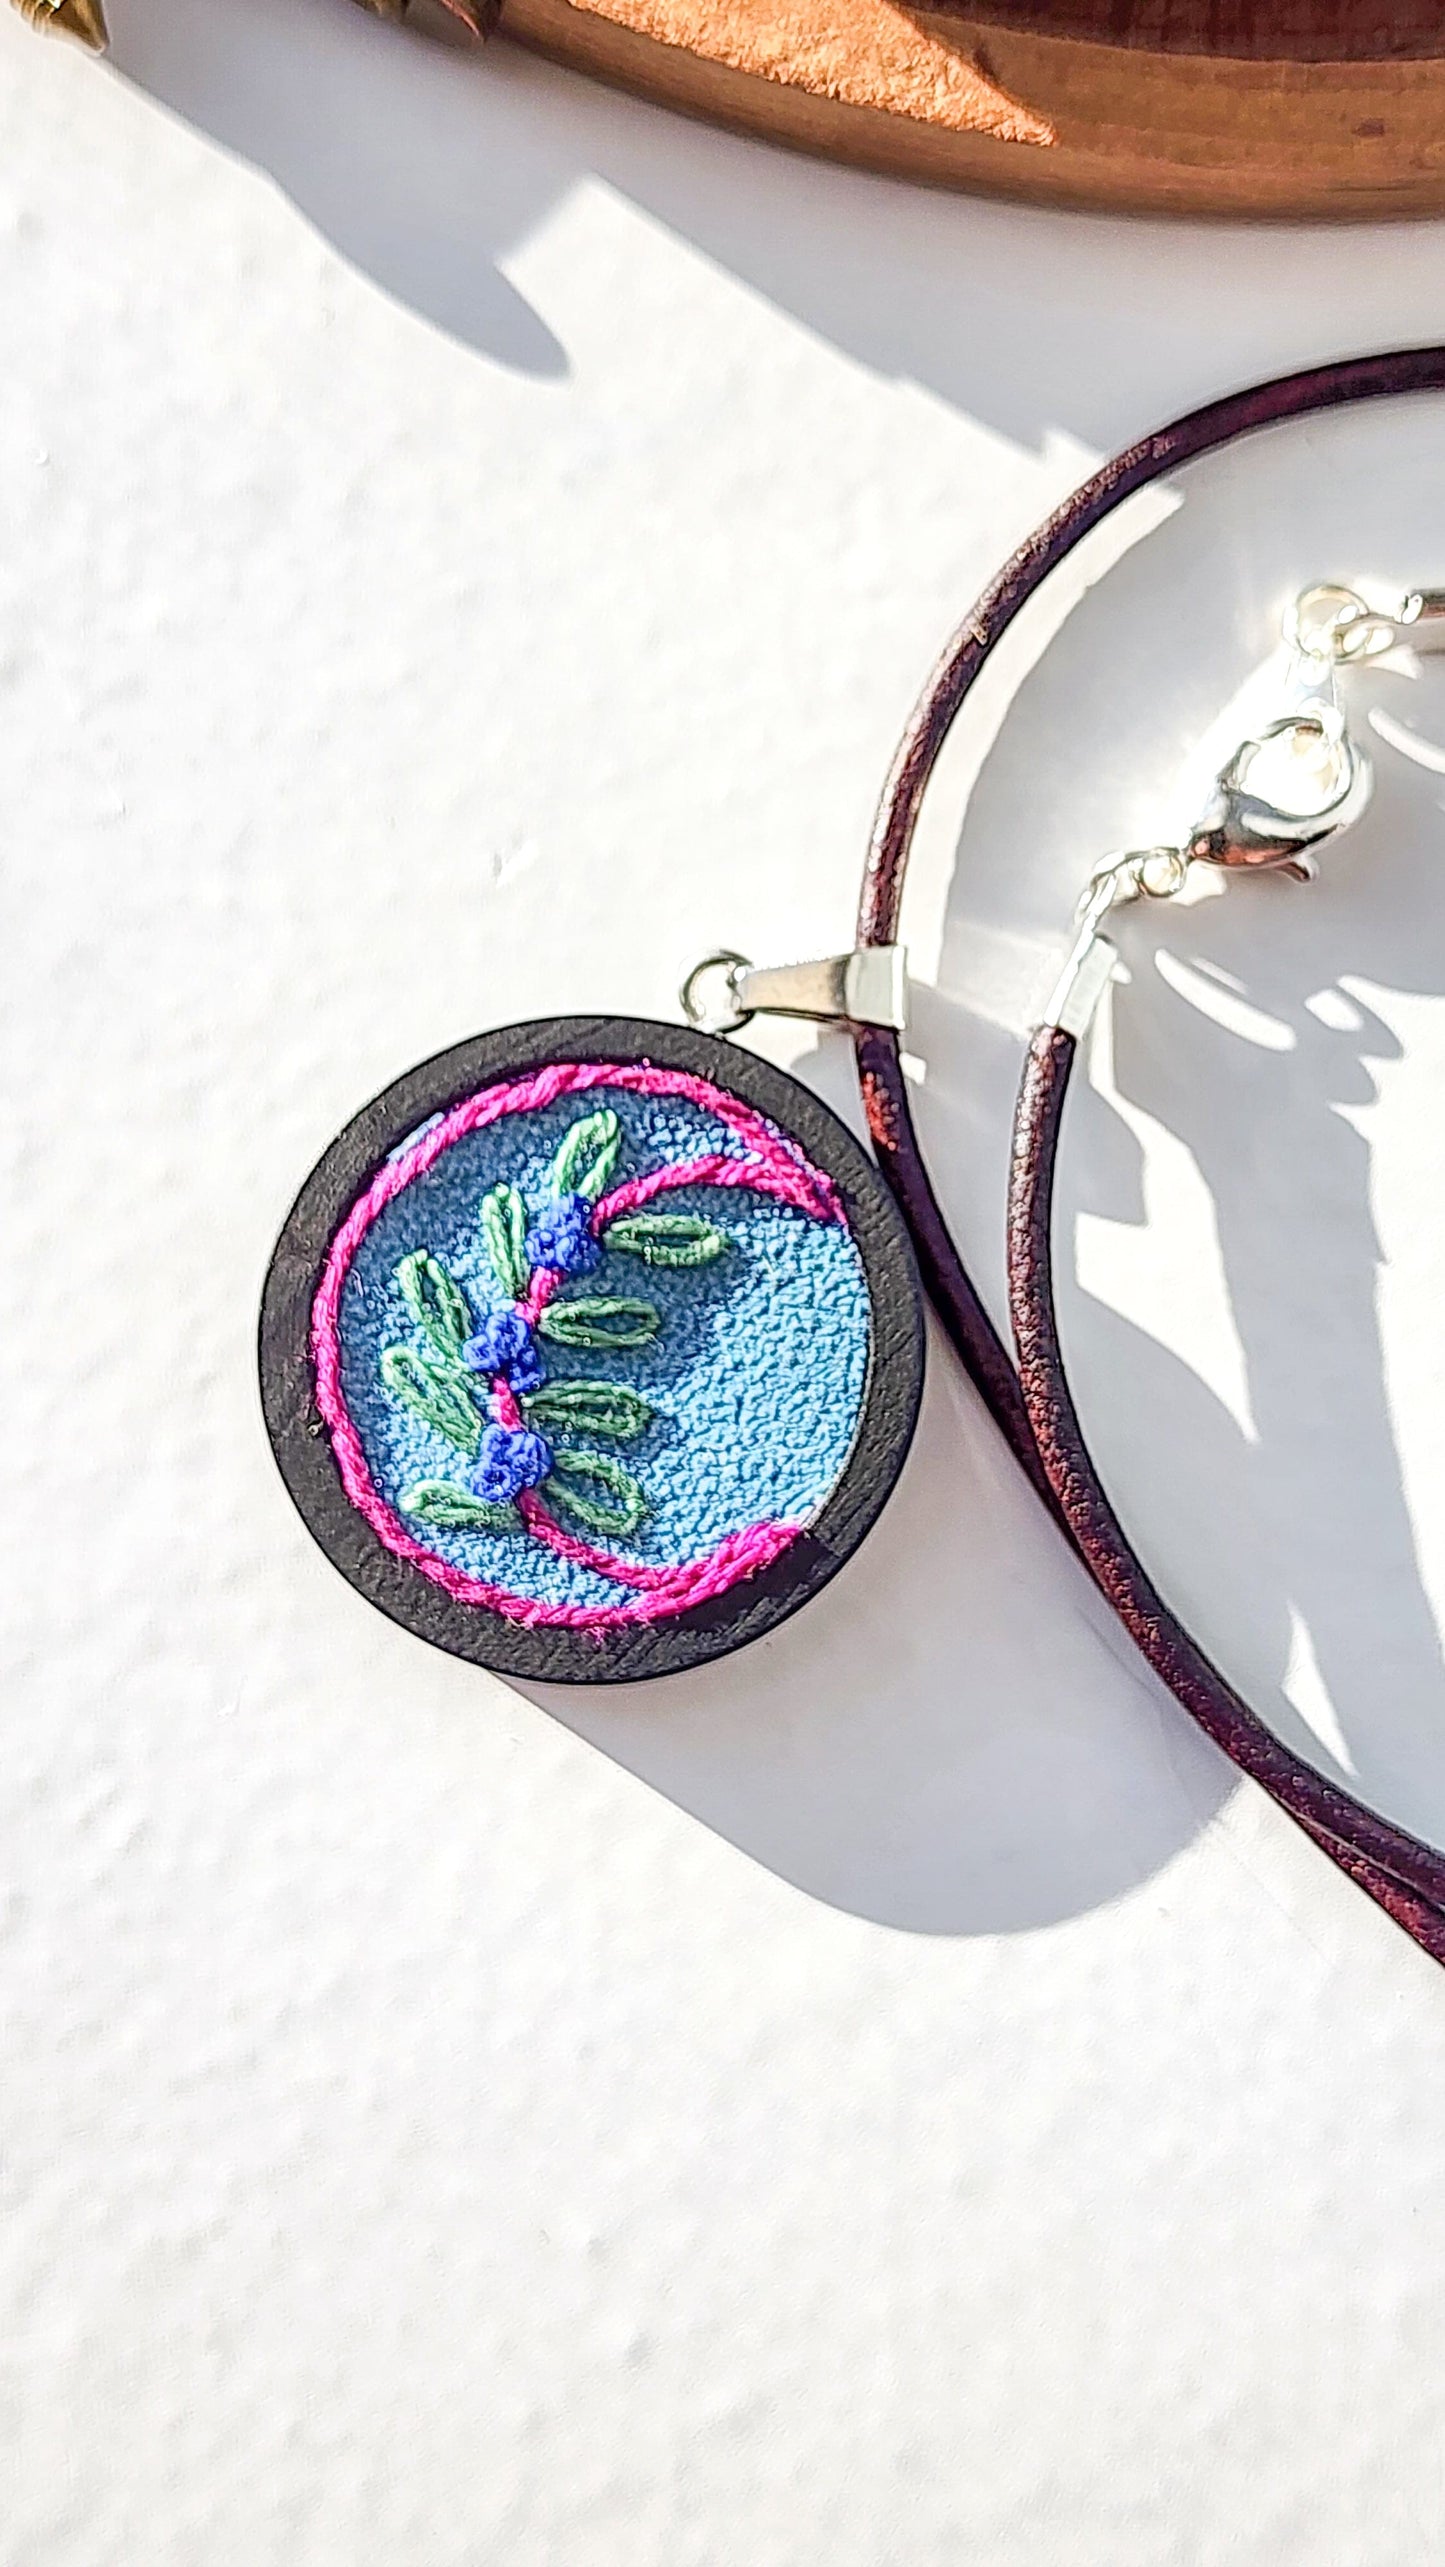 Embrace Embroidery Embroidered Necklace Hand Embroidered Floral Moon Pendant